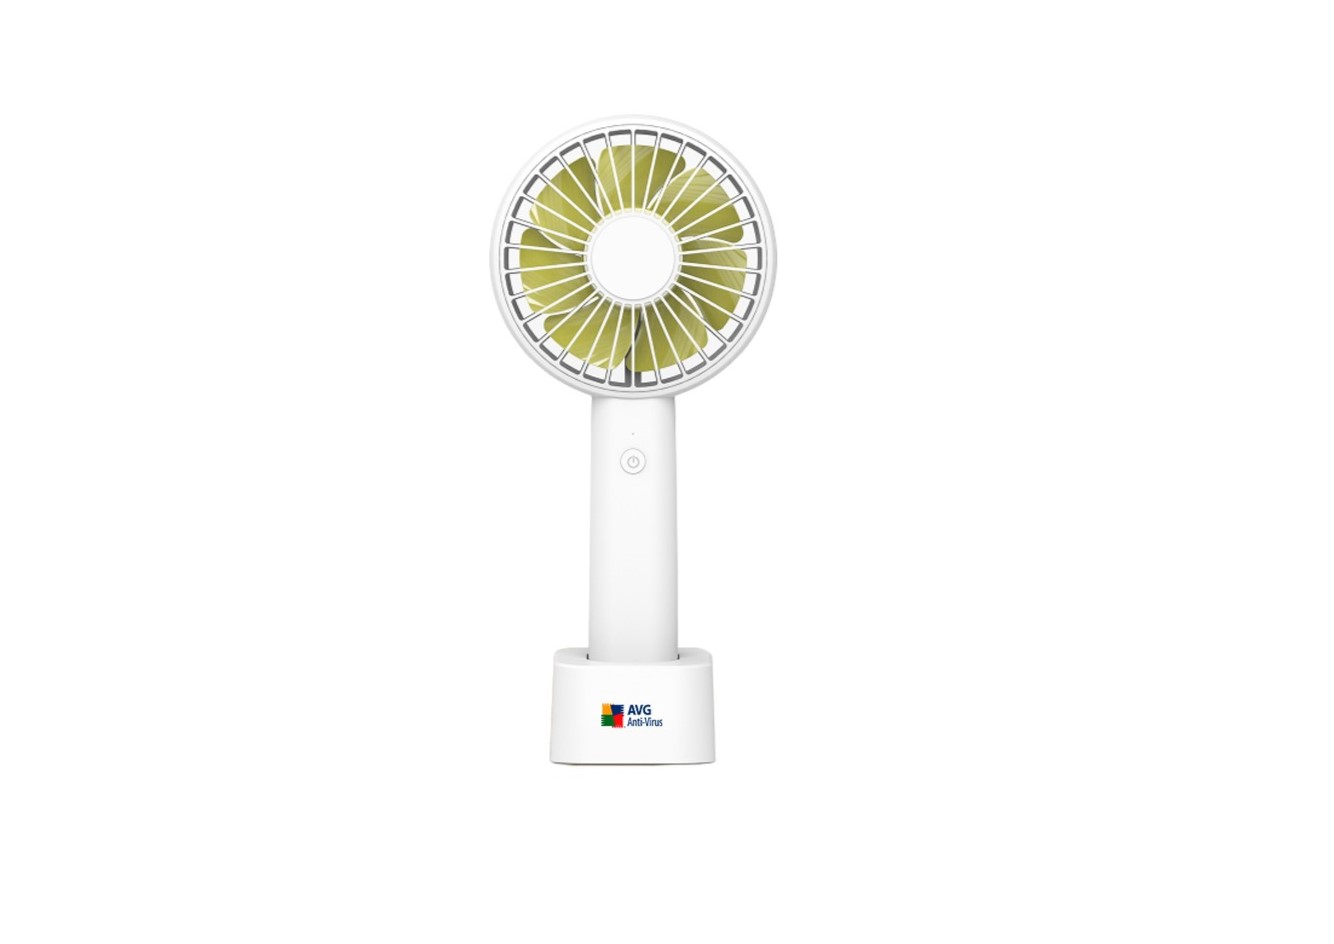 7 Blade Handheld Mini Fan with Built-In Battery